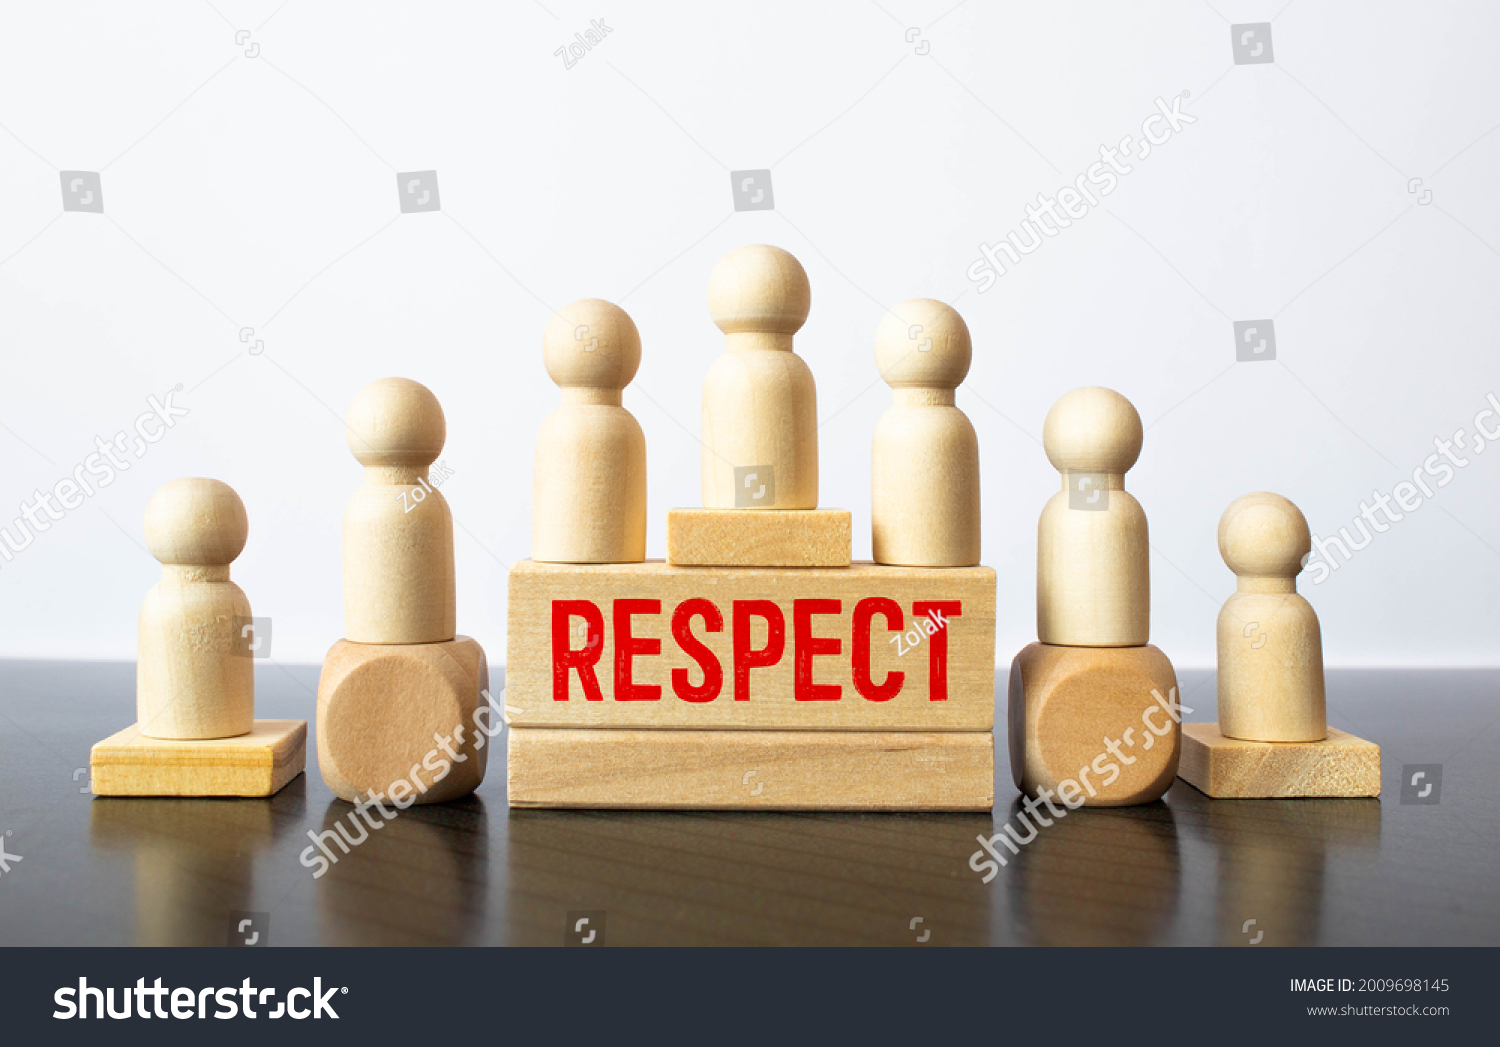 Respect word written on wood block. respect text on table, Business ethics concept #2009698145